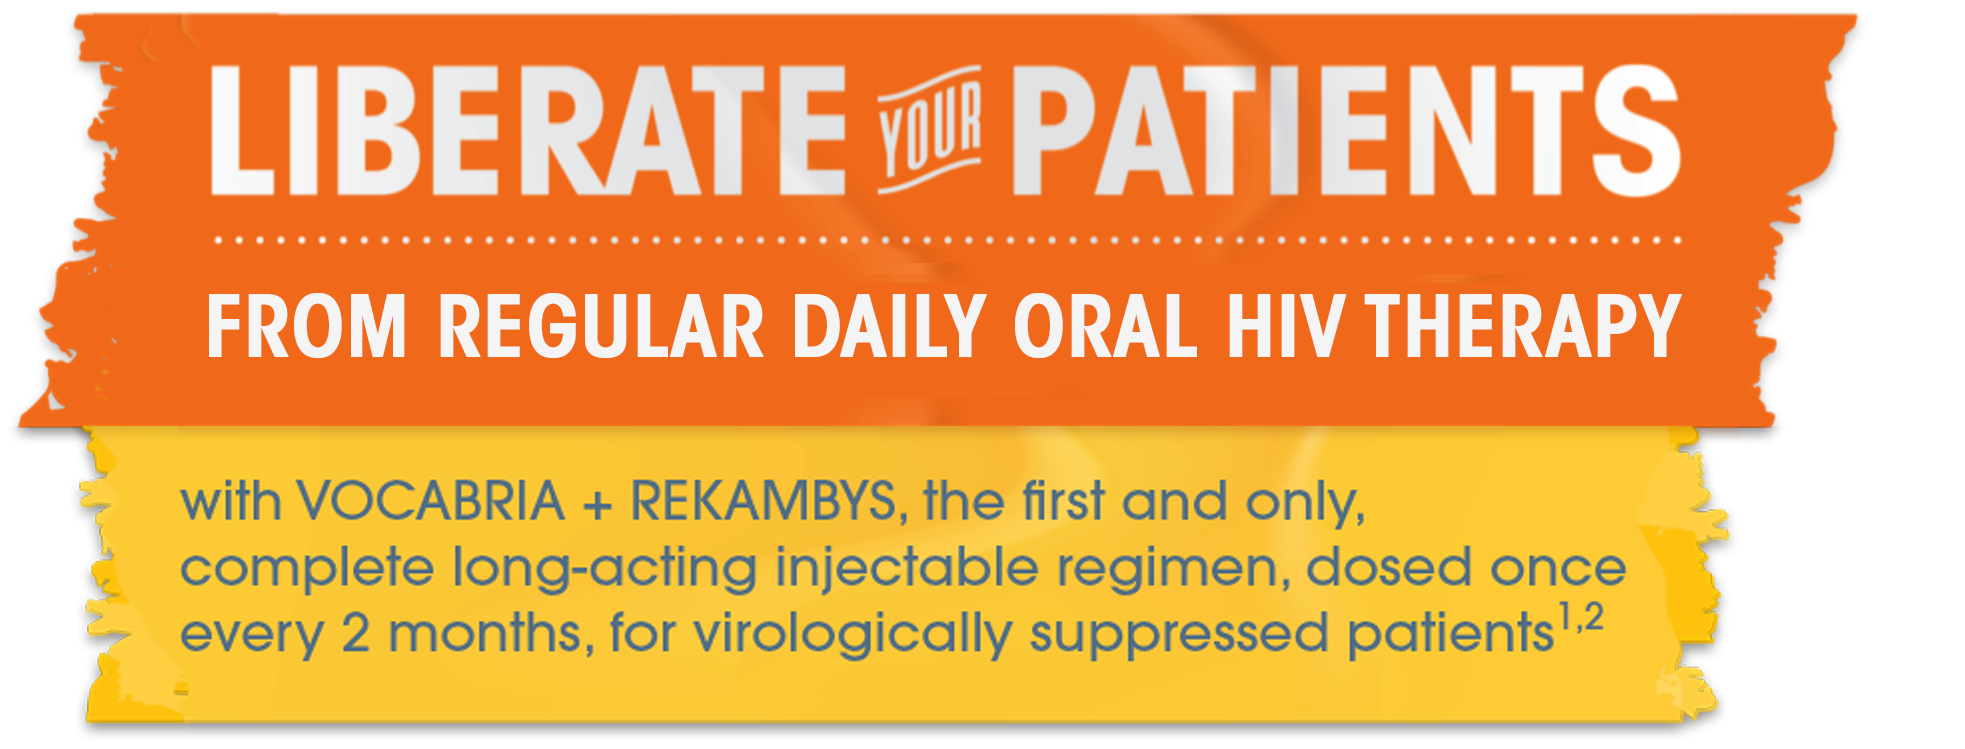 Liberate your patients from daily HIV therapy